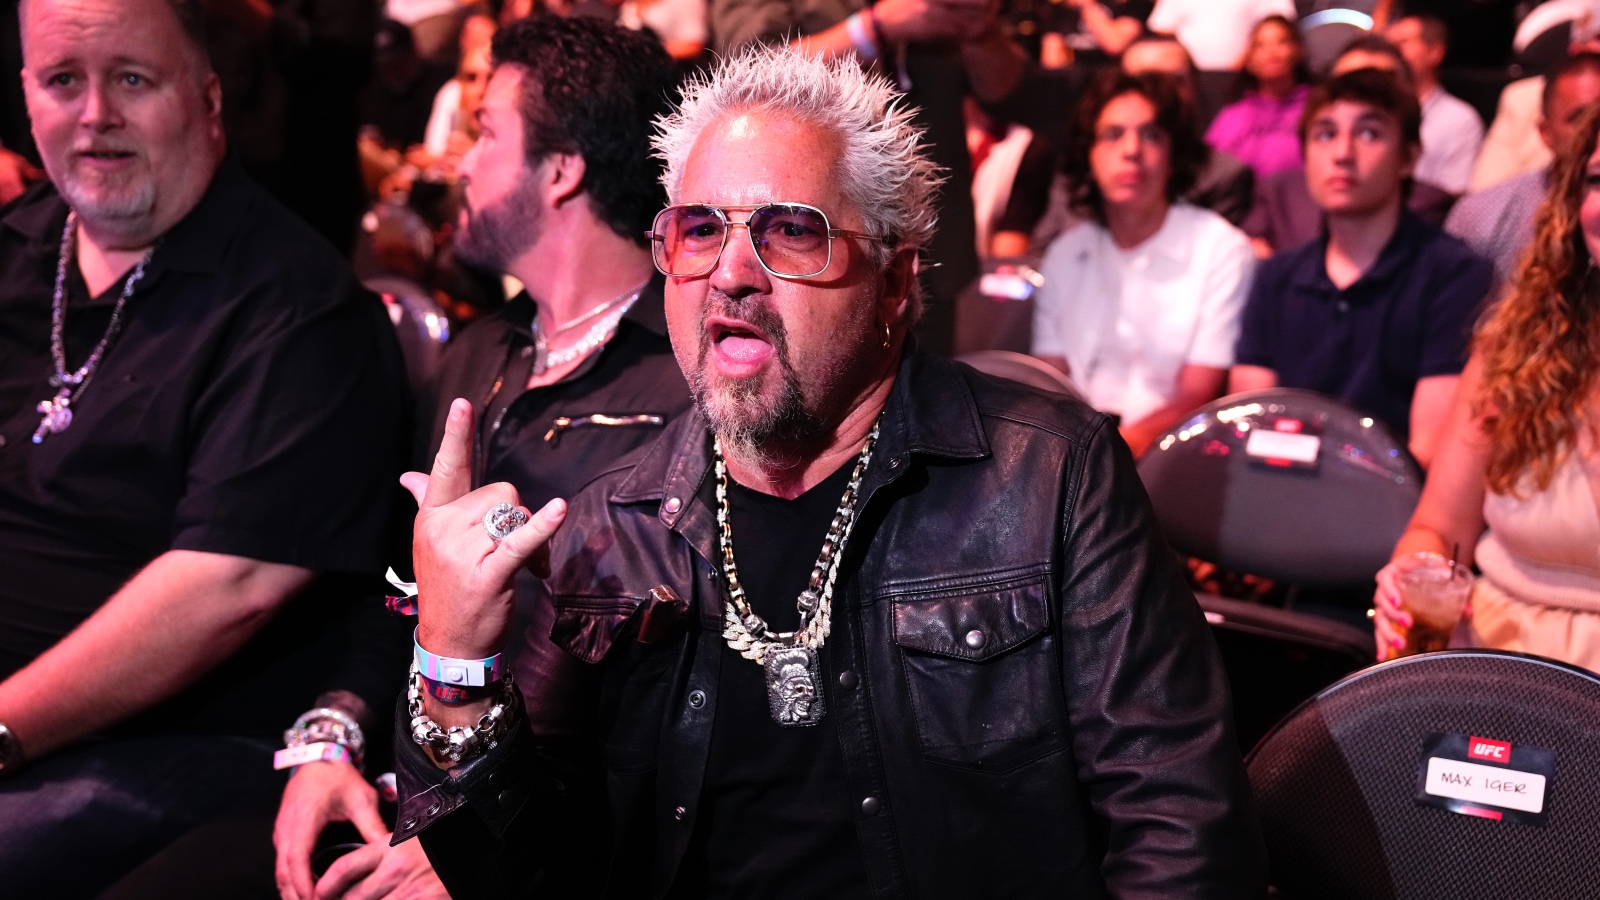 Guy Fieri showing the universal rock star sign